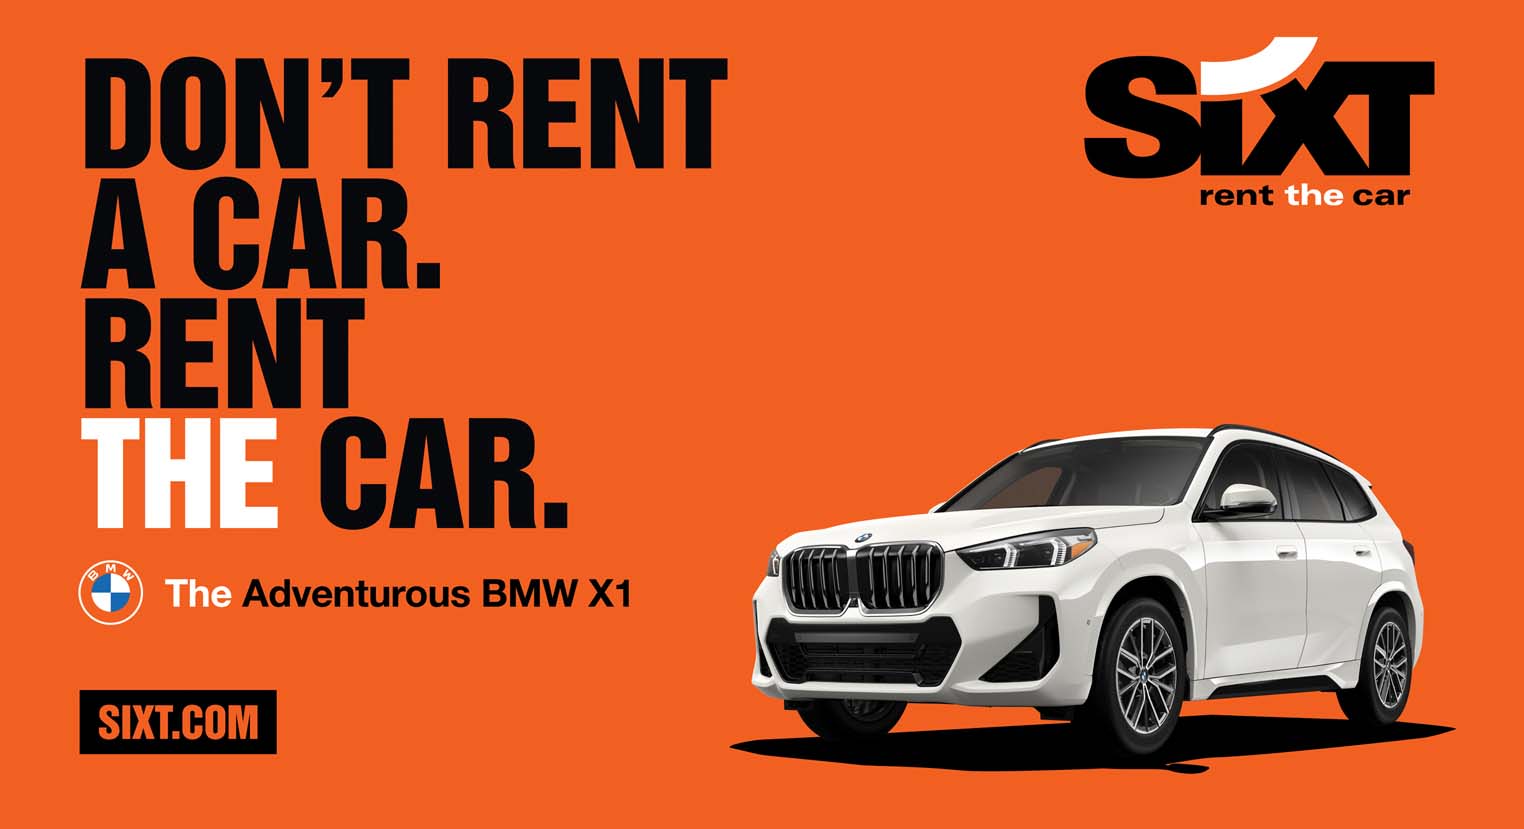 SIXT Launches Integrated Marketing Campaign In The U.S.